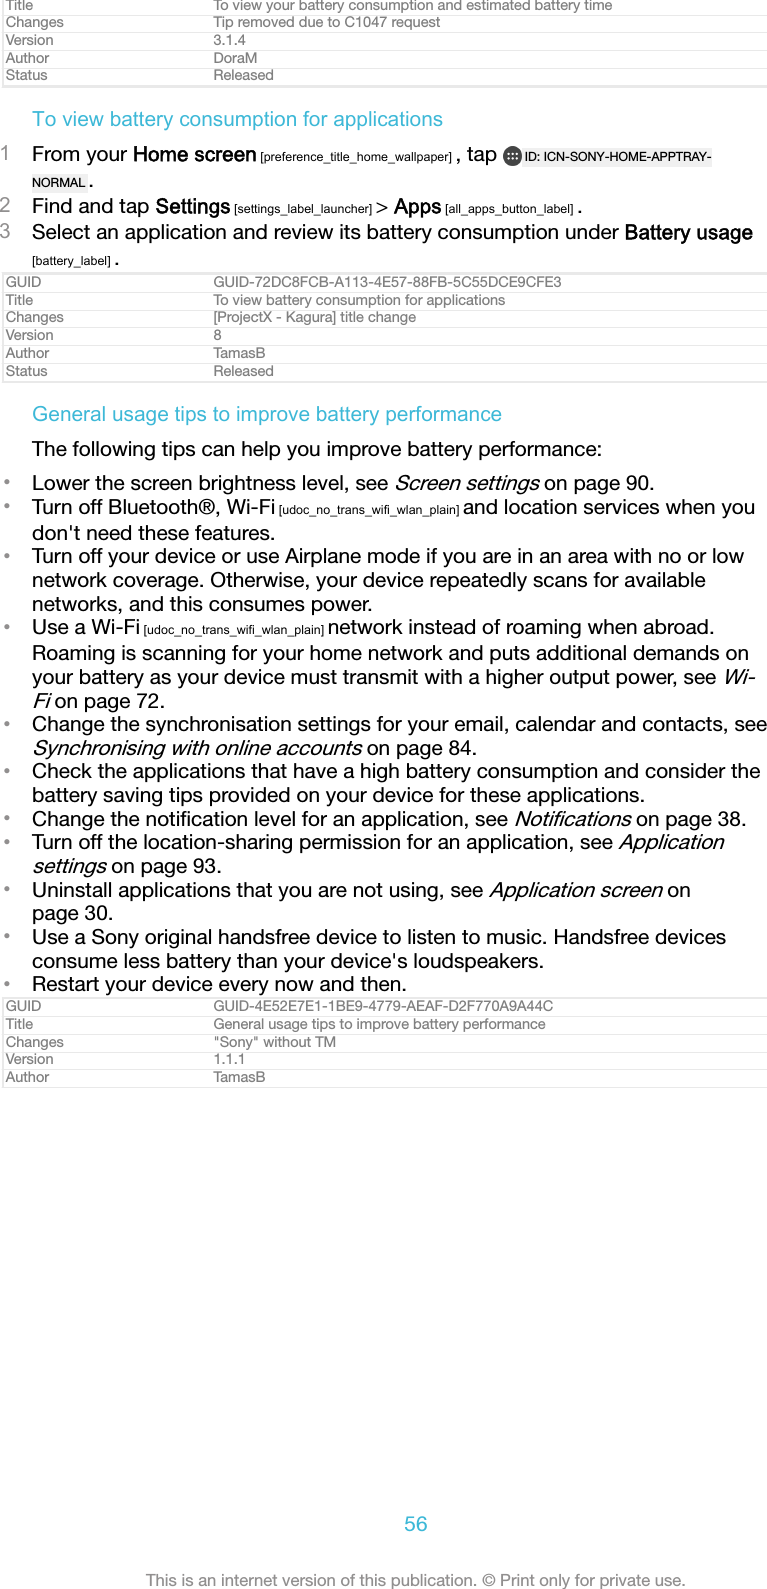 Title To view your battery consumption and estimated battery timeChanges Tip removed due to C1047 requestVersion 3.1.4Author DoraMStatus ReleasedTo view battery consumption for applications1From your Home screen [preference_title_home_wallpaper] , tap  ID: ICN-SONY-HOME-APPTRAY-NORMAL .2Find and tap Settings [settings_label_launcher] &gt; Apps [all_apps_button_label] .3Select an application and review its battery consumption under Battery usage[battery_label] .GUID GUID-72DC8FCB-A113-4E57-88FB-5C55DCE9CFE3Title To view battery consumption for applicationsChanges [ProjectX - Kagura] title changeVersion 8Author TamasBStatus ReleasedGeneral usage tips to improve battery performanceThe following tips can help you improve battery performance:•Lower the screen brightness level, see Screen settings on page 90.•Turn off Bluetooth®, Wi-Fi [udoc_no_trans_wifi_wlan_plain] and location services when youdon&apos;t need these features.•Turn off your device or use Airplane mode if you are in an area with no or lownetwork coverage. Otherwise, your device repeatedly scans for availablenetworks, and this consumes power.•Use a Wi-Fi [udoc_no_trans_wifi_wlan_plain] network instead of roaming when abroad.Roaming is scanning for your home network and puts additional demands onyour battery as your device must transmit with a higher output power, see Wi-Fi on page 72.•Change the synchronisation settings for your email, calendar and contacts, seeSynchronising with online accounts on page 84.•Check the applications that have a high battery consumption and consider thebattery saving tips provided on your device for these applications.•Change the notiﬁcation level for an application, see Notiﬁcations on page 38.•Turn off the location-sharing permission for an application, see Applicationsettings on page 93.•Uninstall applications that you are not using, see Application screen onpage 30.•Use a Sony original handsfree device to listen to music. Handsfree devicesconsume less battery than your device&apos;s loudspeakers.•Restart your device every now and then.GUID GUID-4E52E7E1-1BE9-4779-AEAF-D2F770A9A44CTitle General usage tips to improve battery performanceChanges &quot;Sony&quot; without TMVersion 1.1.1Author TamasB56This is an internet version of this publication. © Print only for private use.